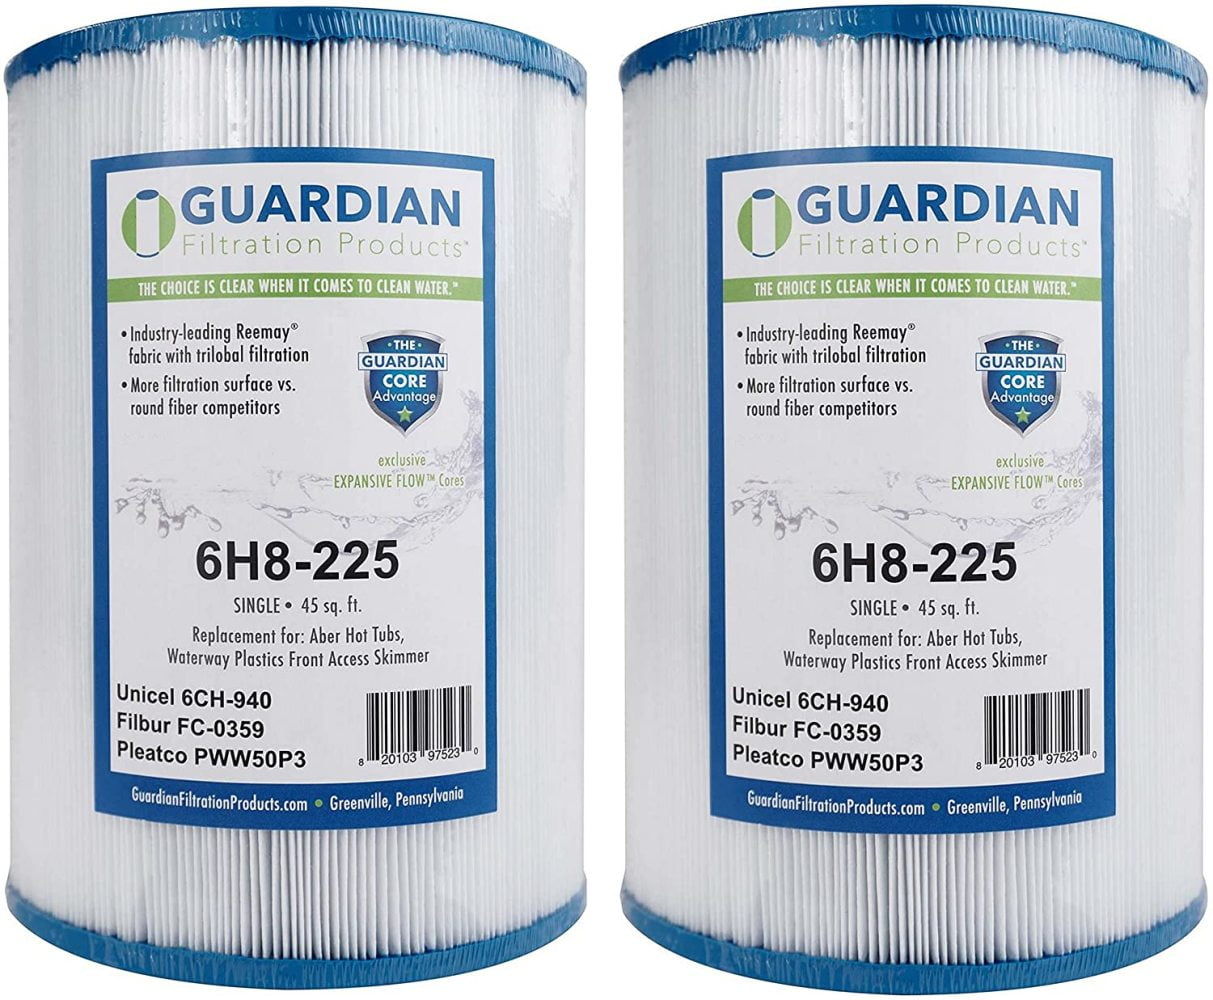 Replacement Pool Spa Filter Pleatco PWW50P3-M Guardian Filtration Products Filbur FC-0359M for Unicel 6CH-940RA 2 Pack 